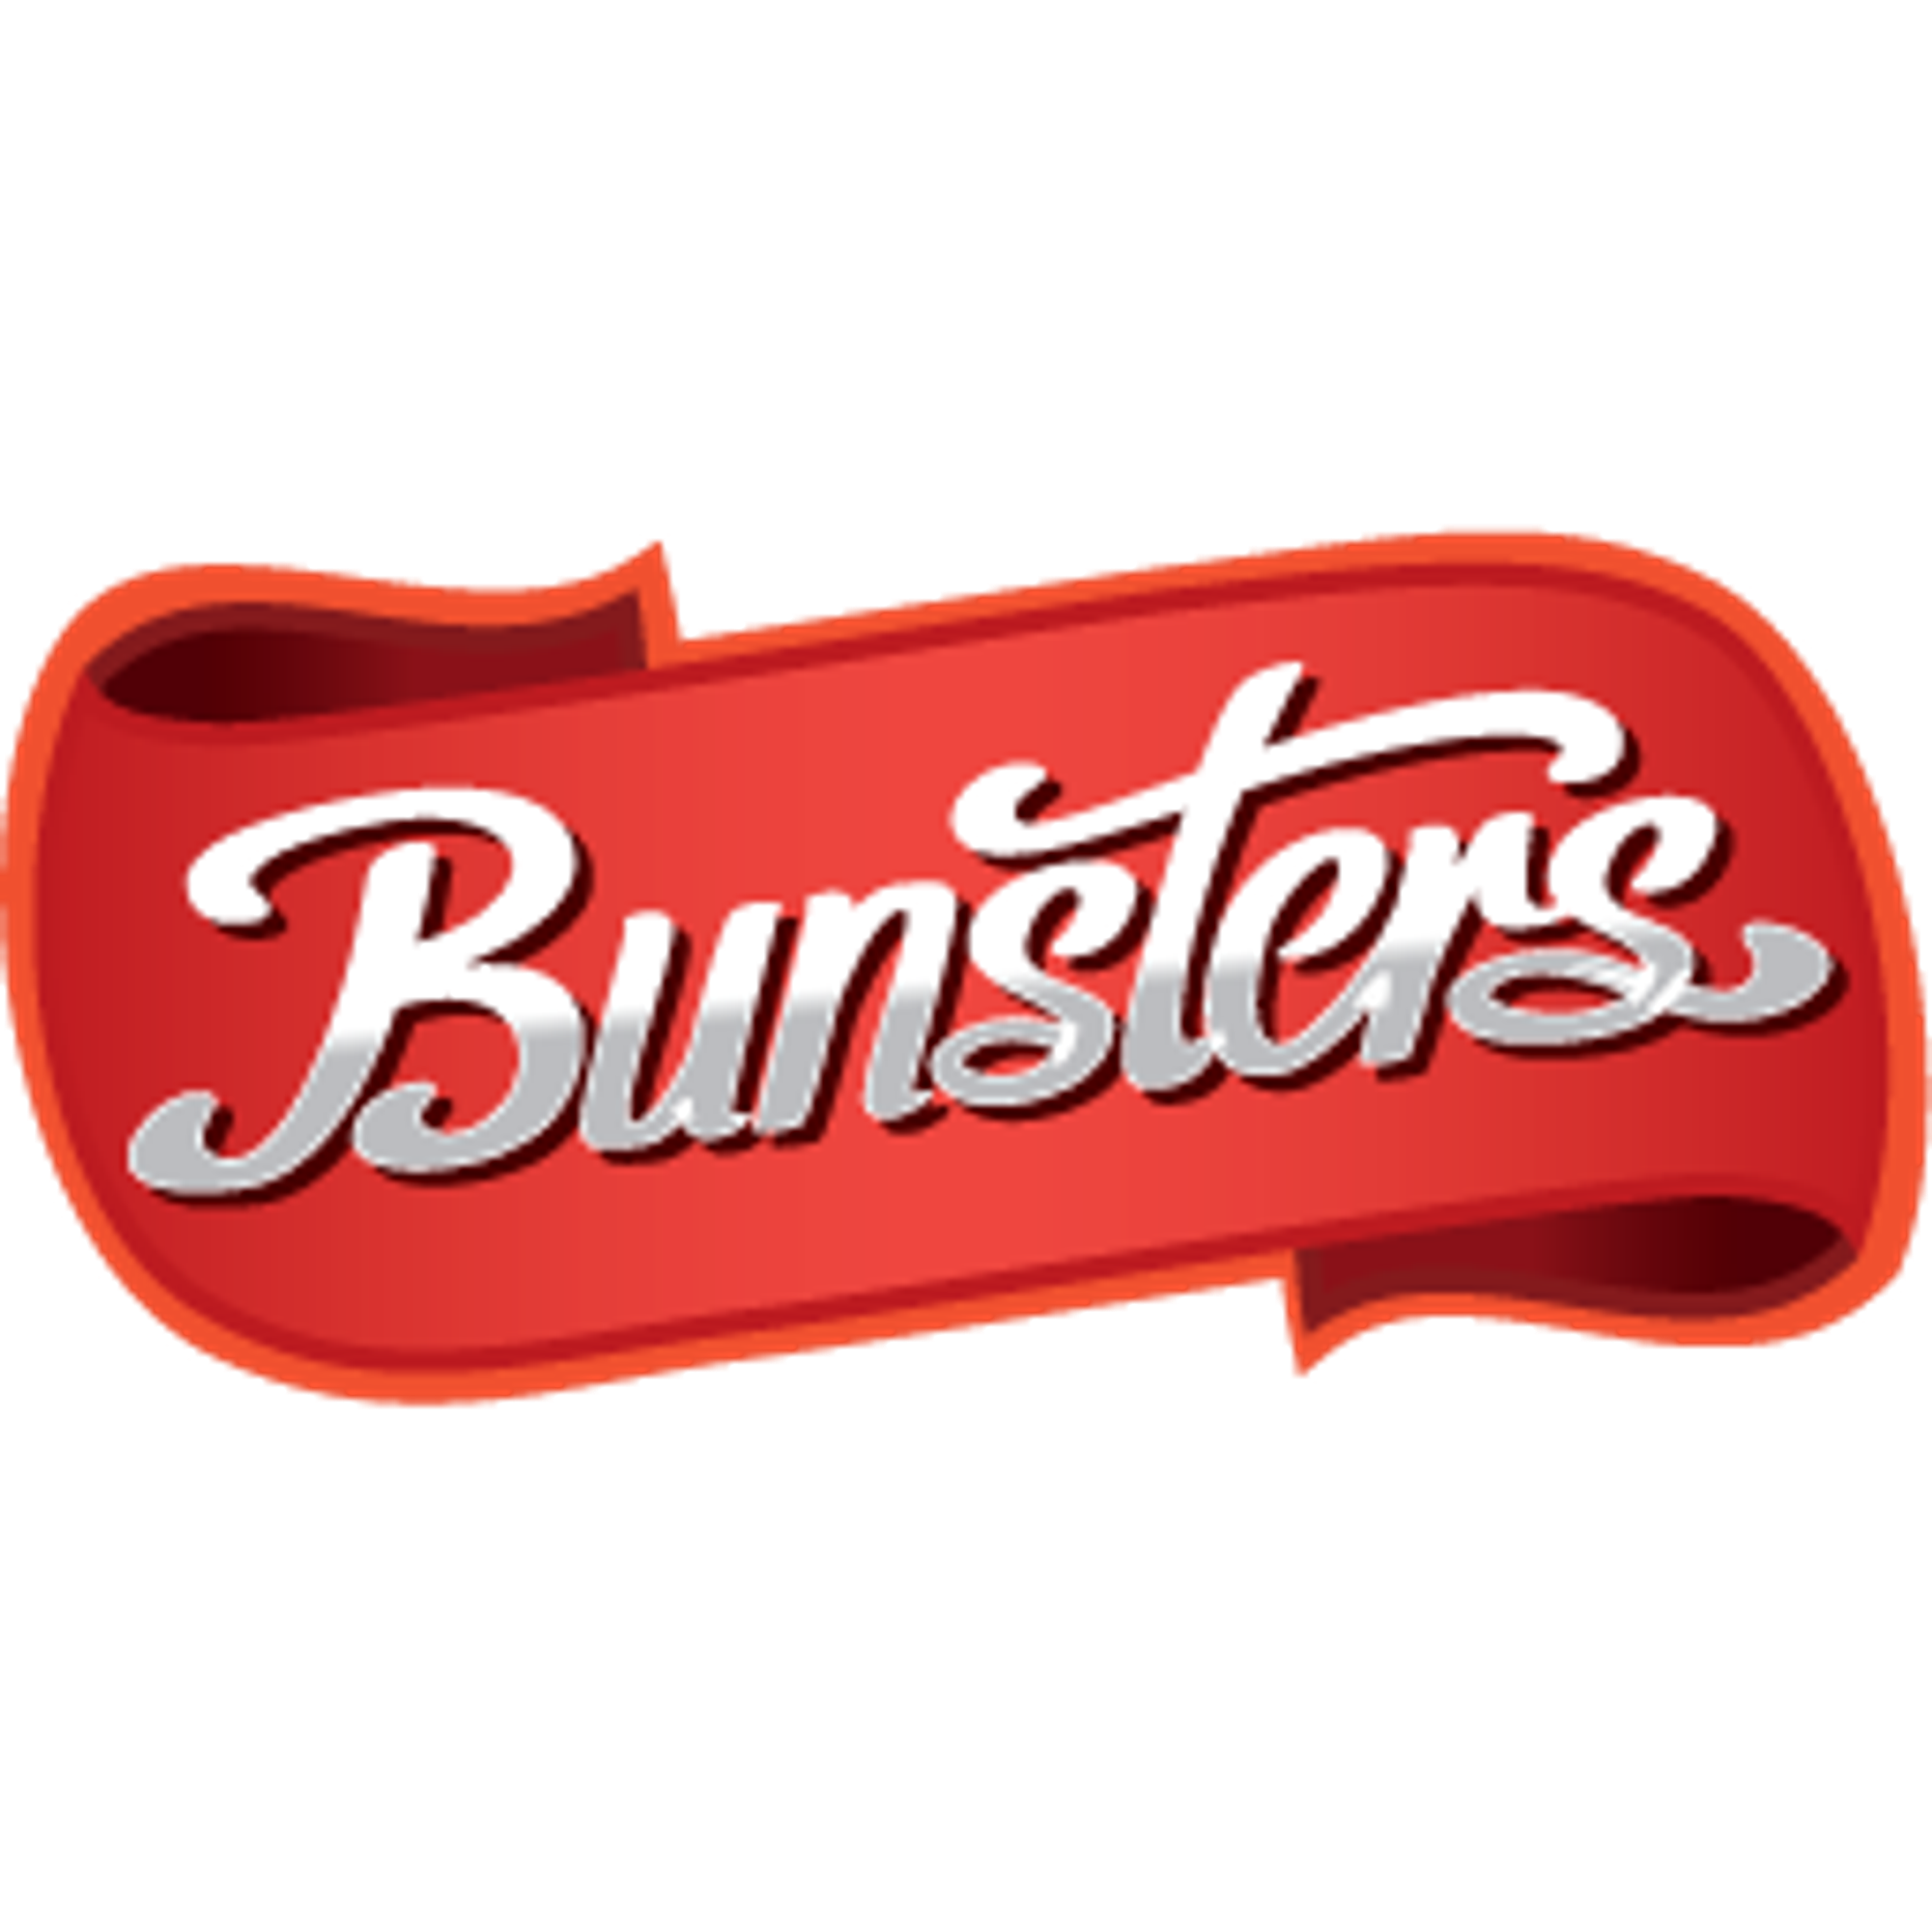 Bunsters